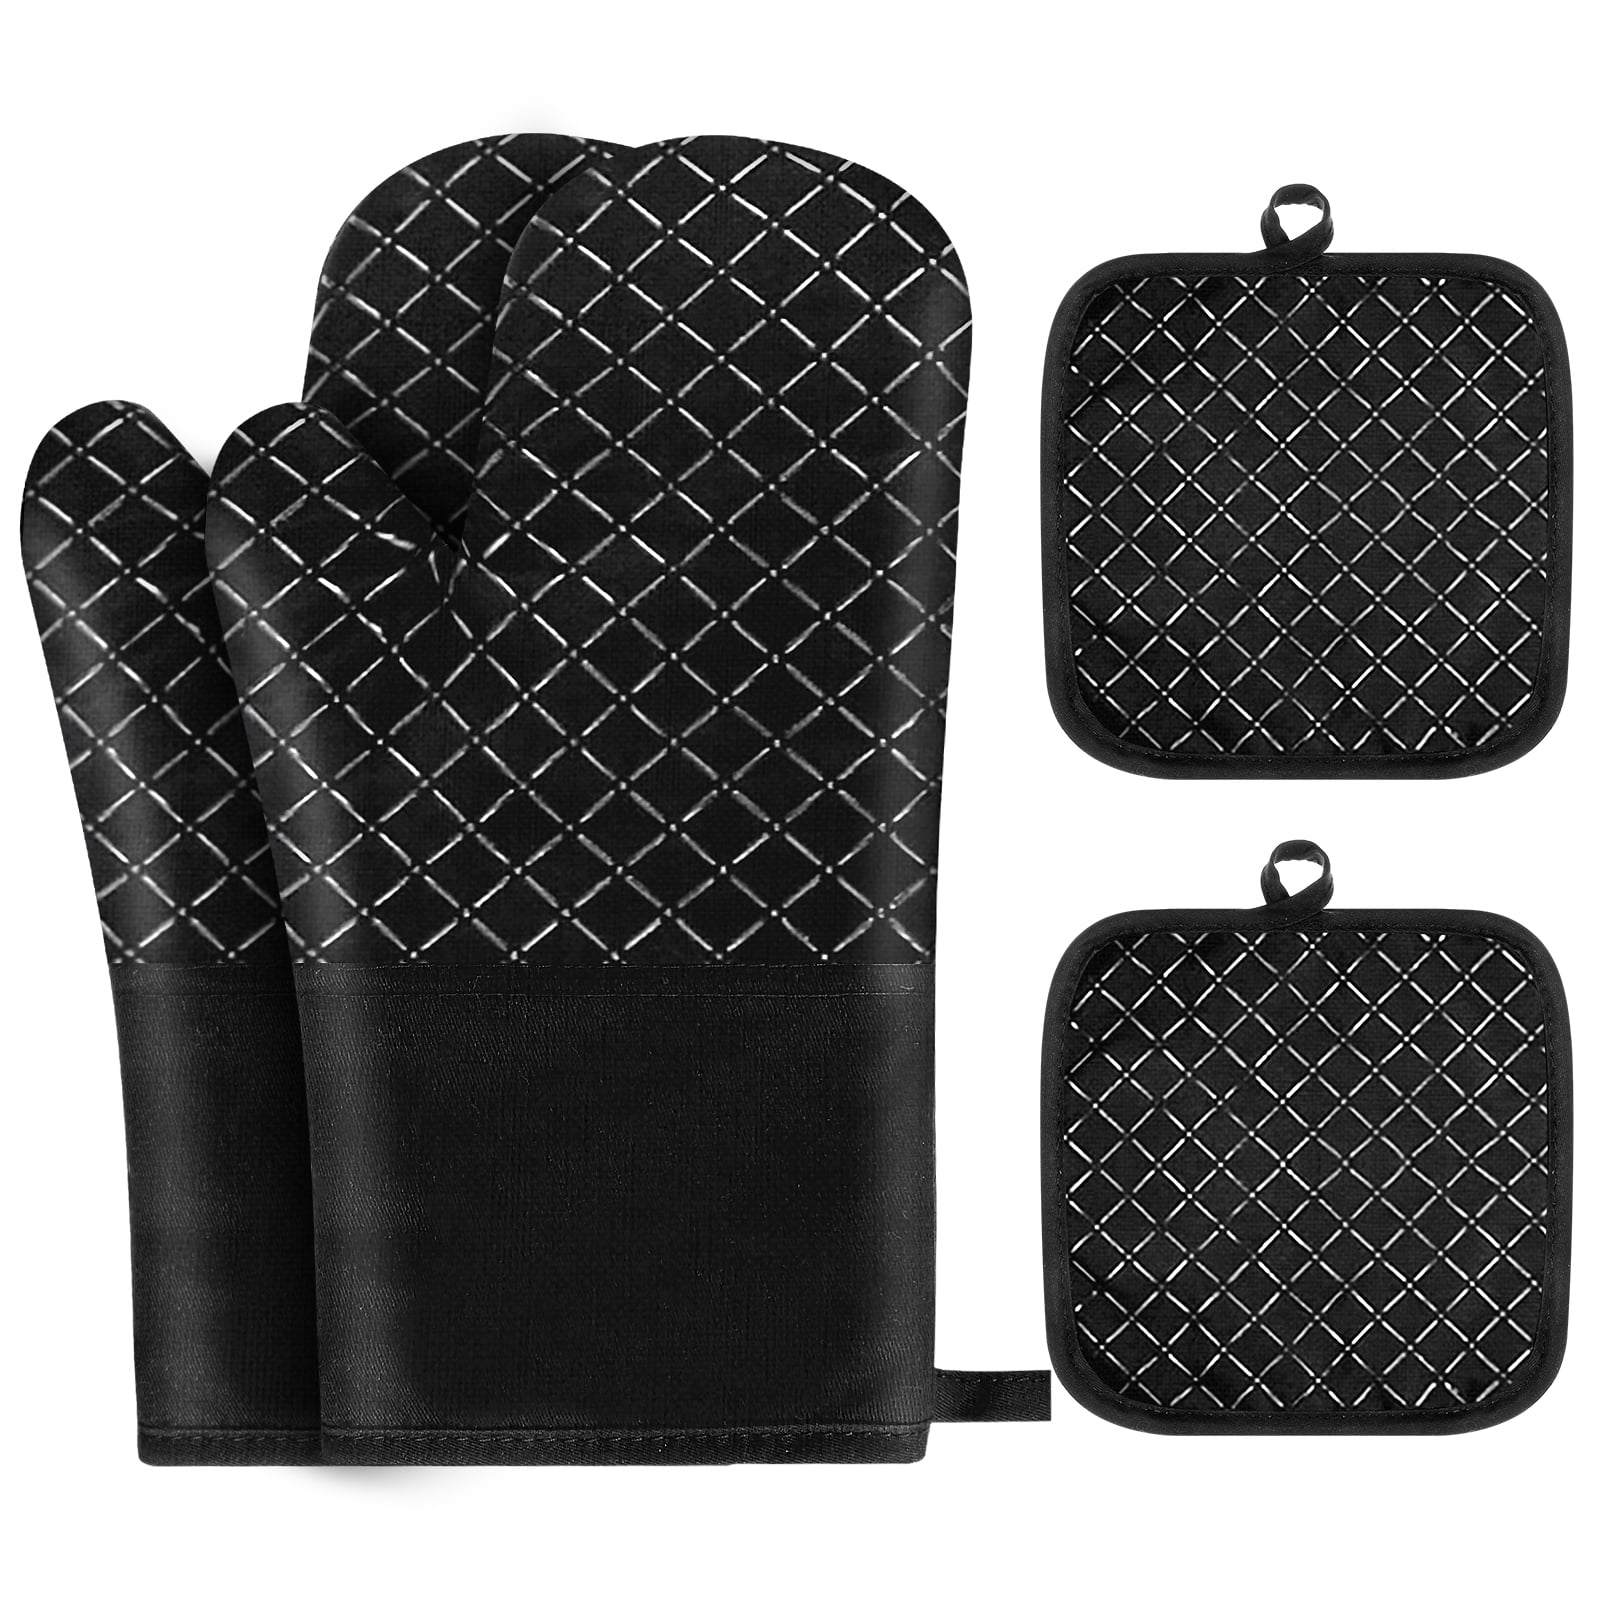 AOWOO 4 Pcs Pot Holders and Oven Mitts Sets, Bake Pot Holders Gloves ...